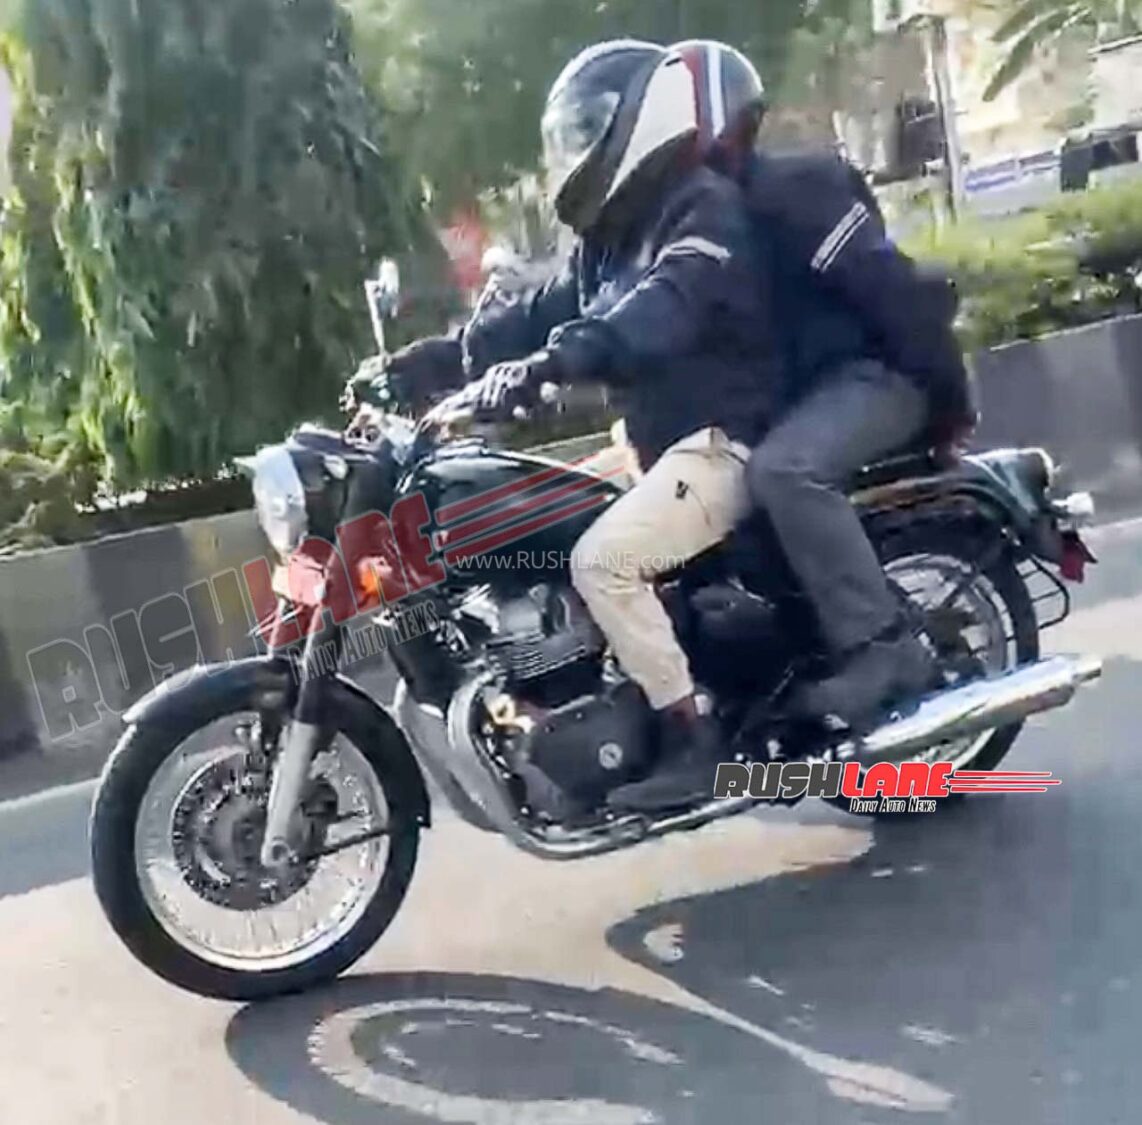 RE Classic 650 spied